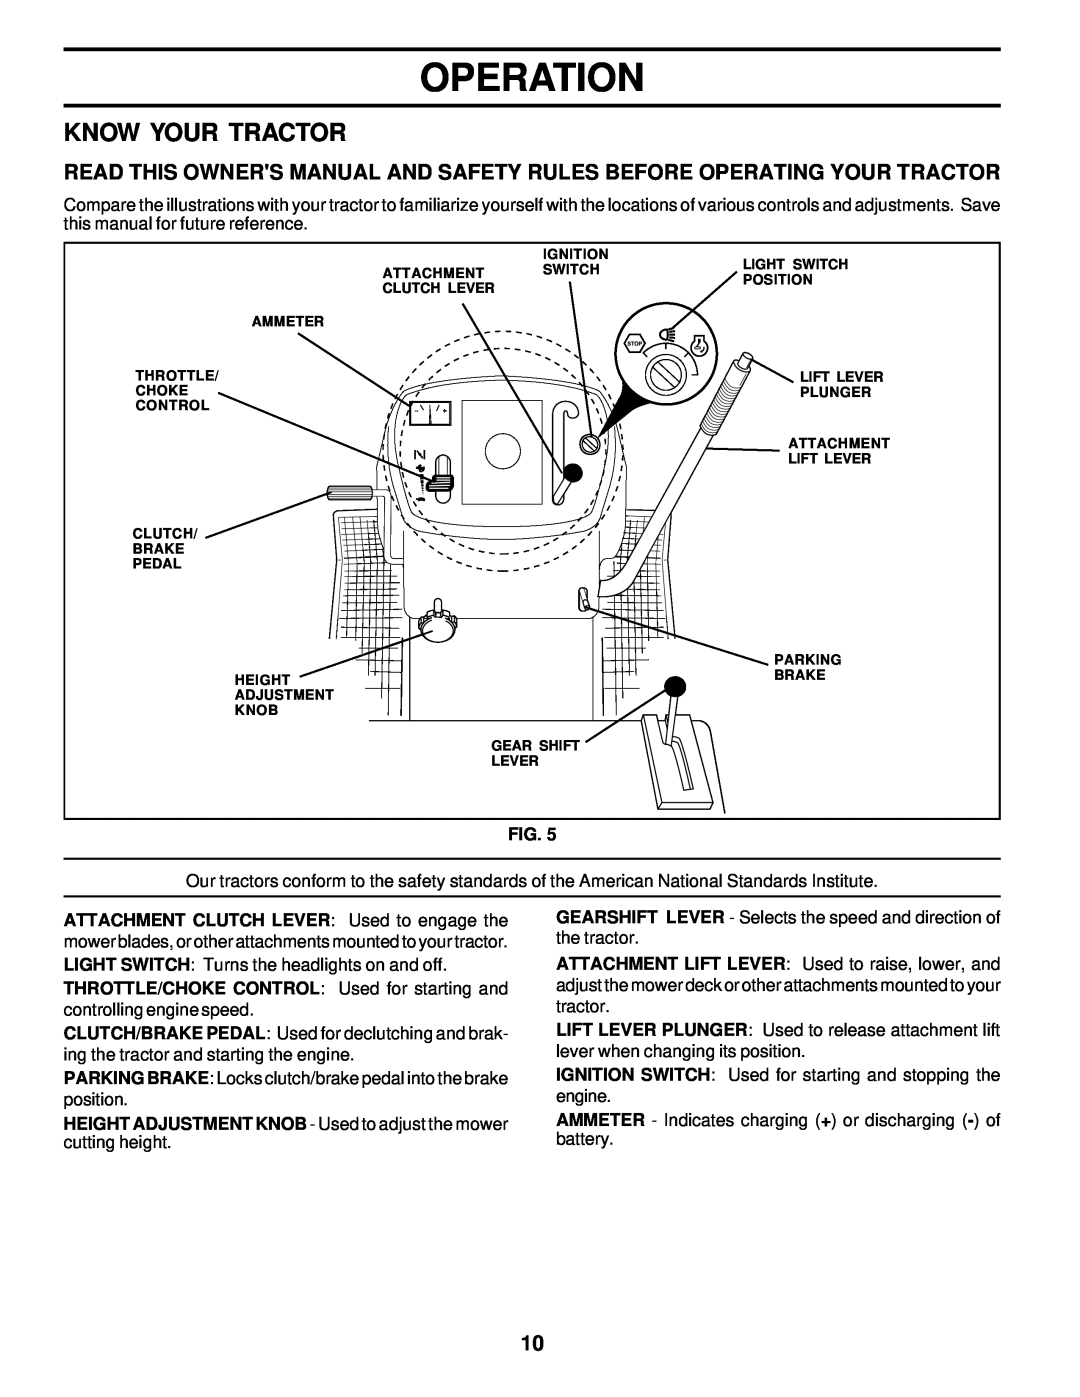 Poulan 178108 owner manual Know Your Tractor, Operation, HEIGHT ADJUSTMENT KNOB - Used to adjust the mower cutting height 